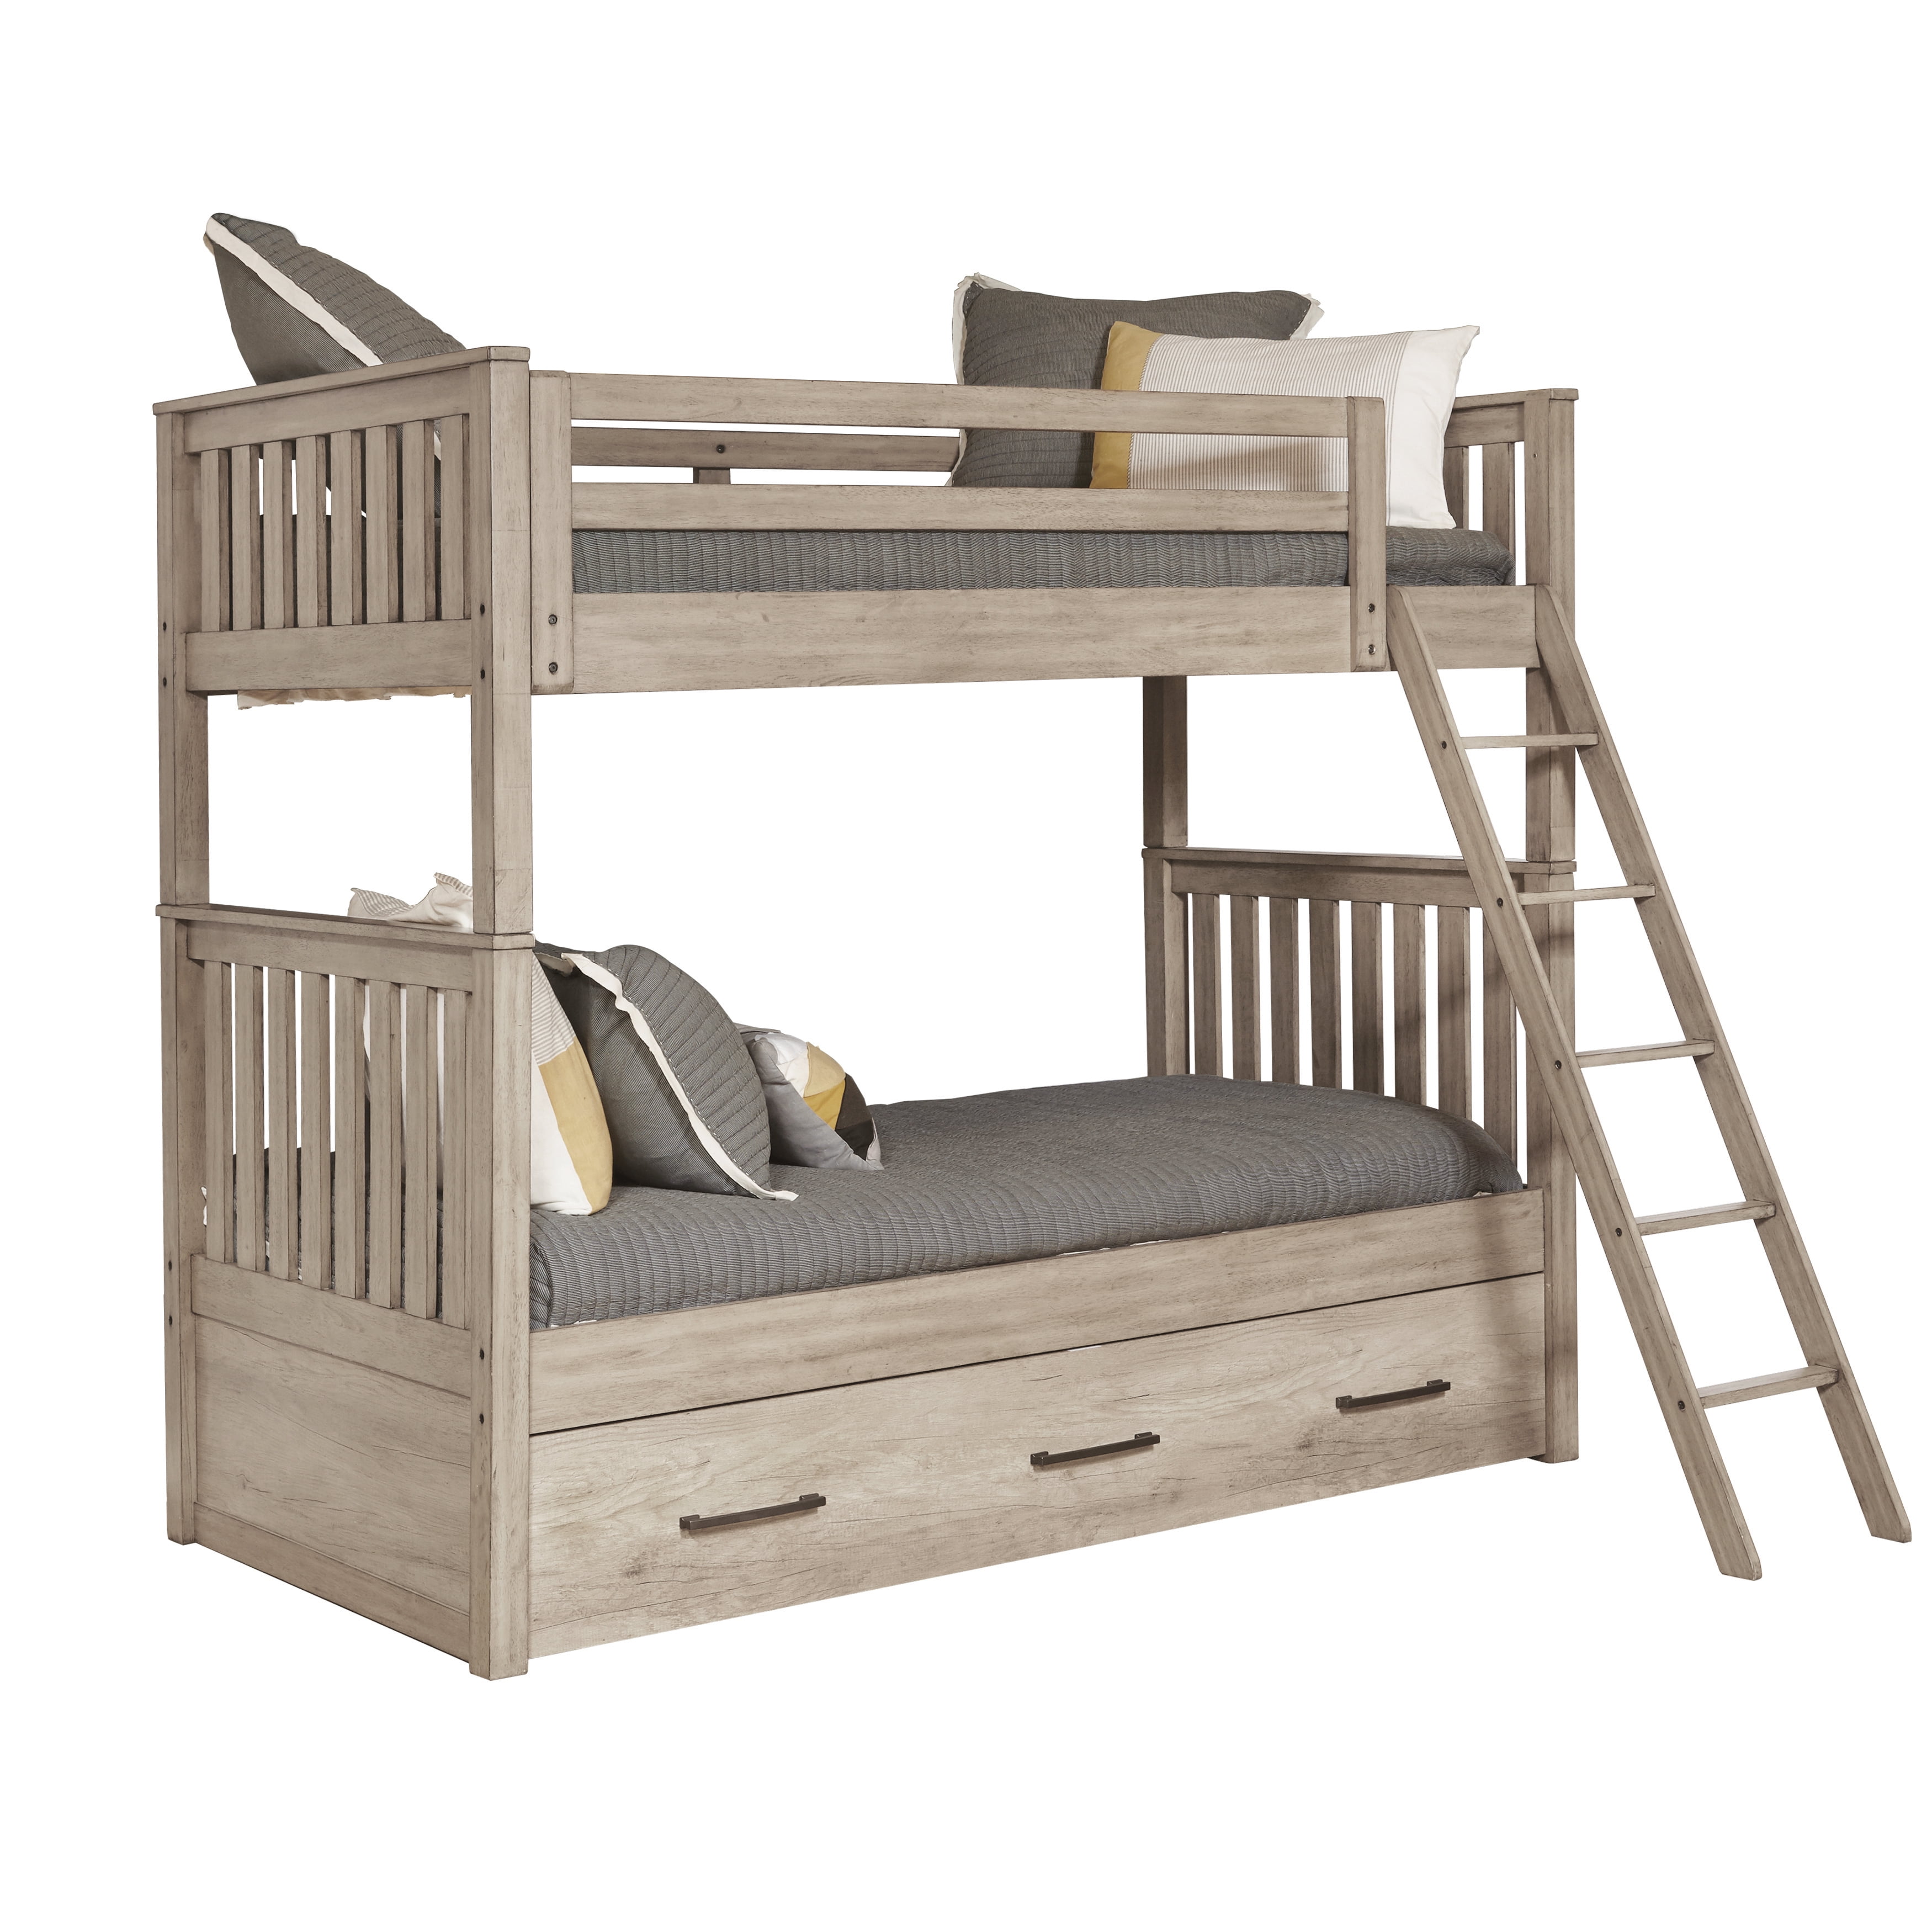 Home Meridian Kids Bunk Bed End In, Bunk Beds Olympia Wa